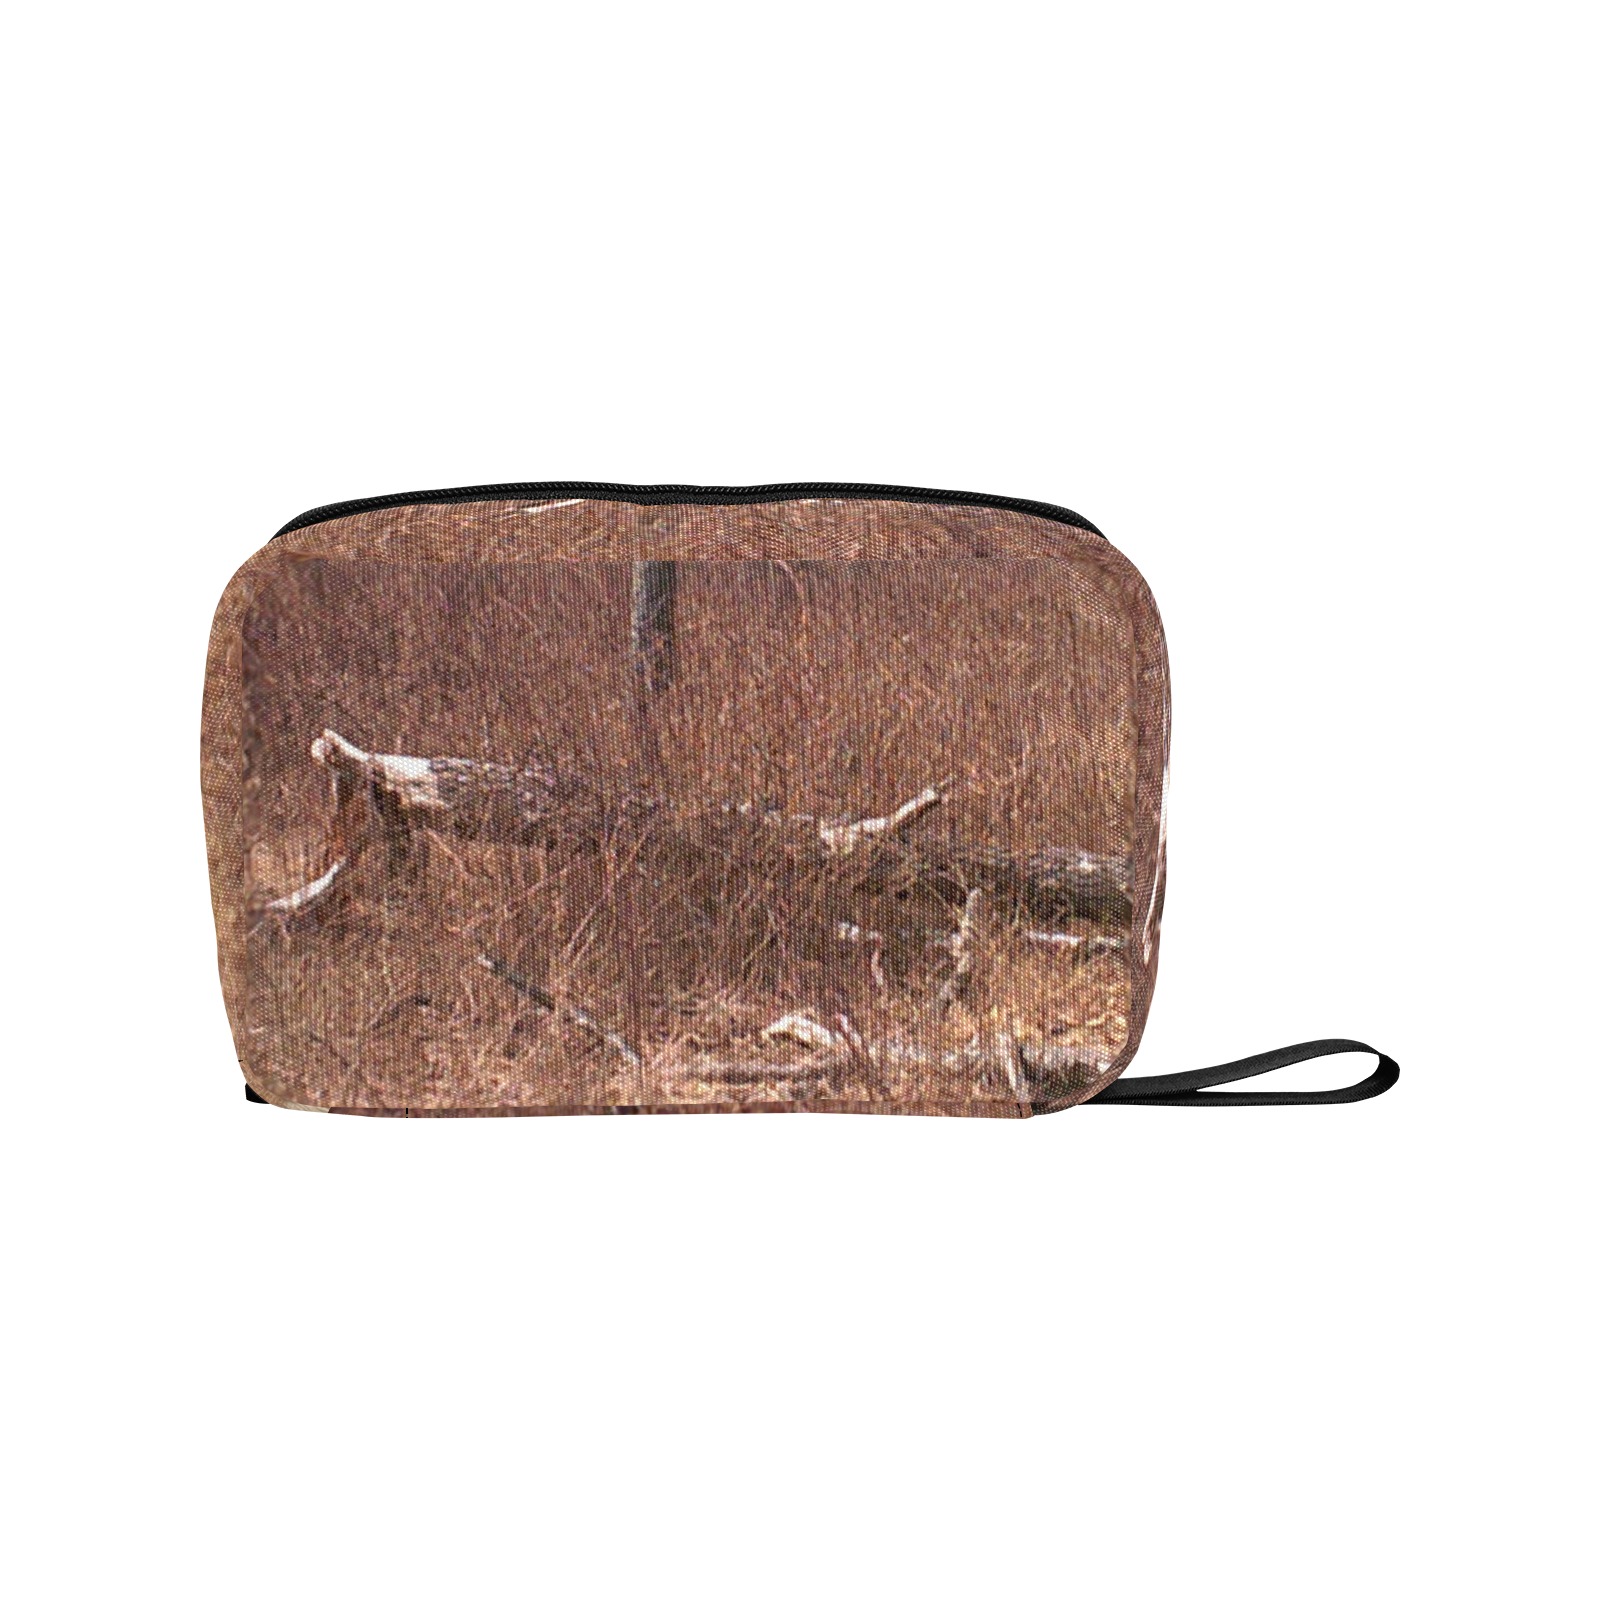 Falling tree in the woods Toiletry Bag with Hanging Hook (Model 1728)